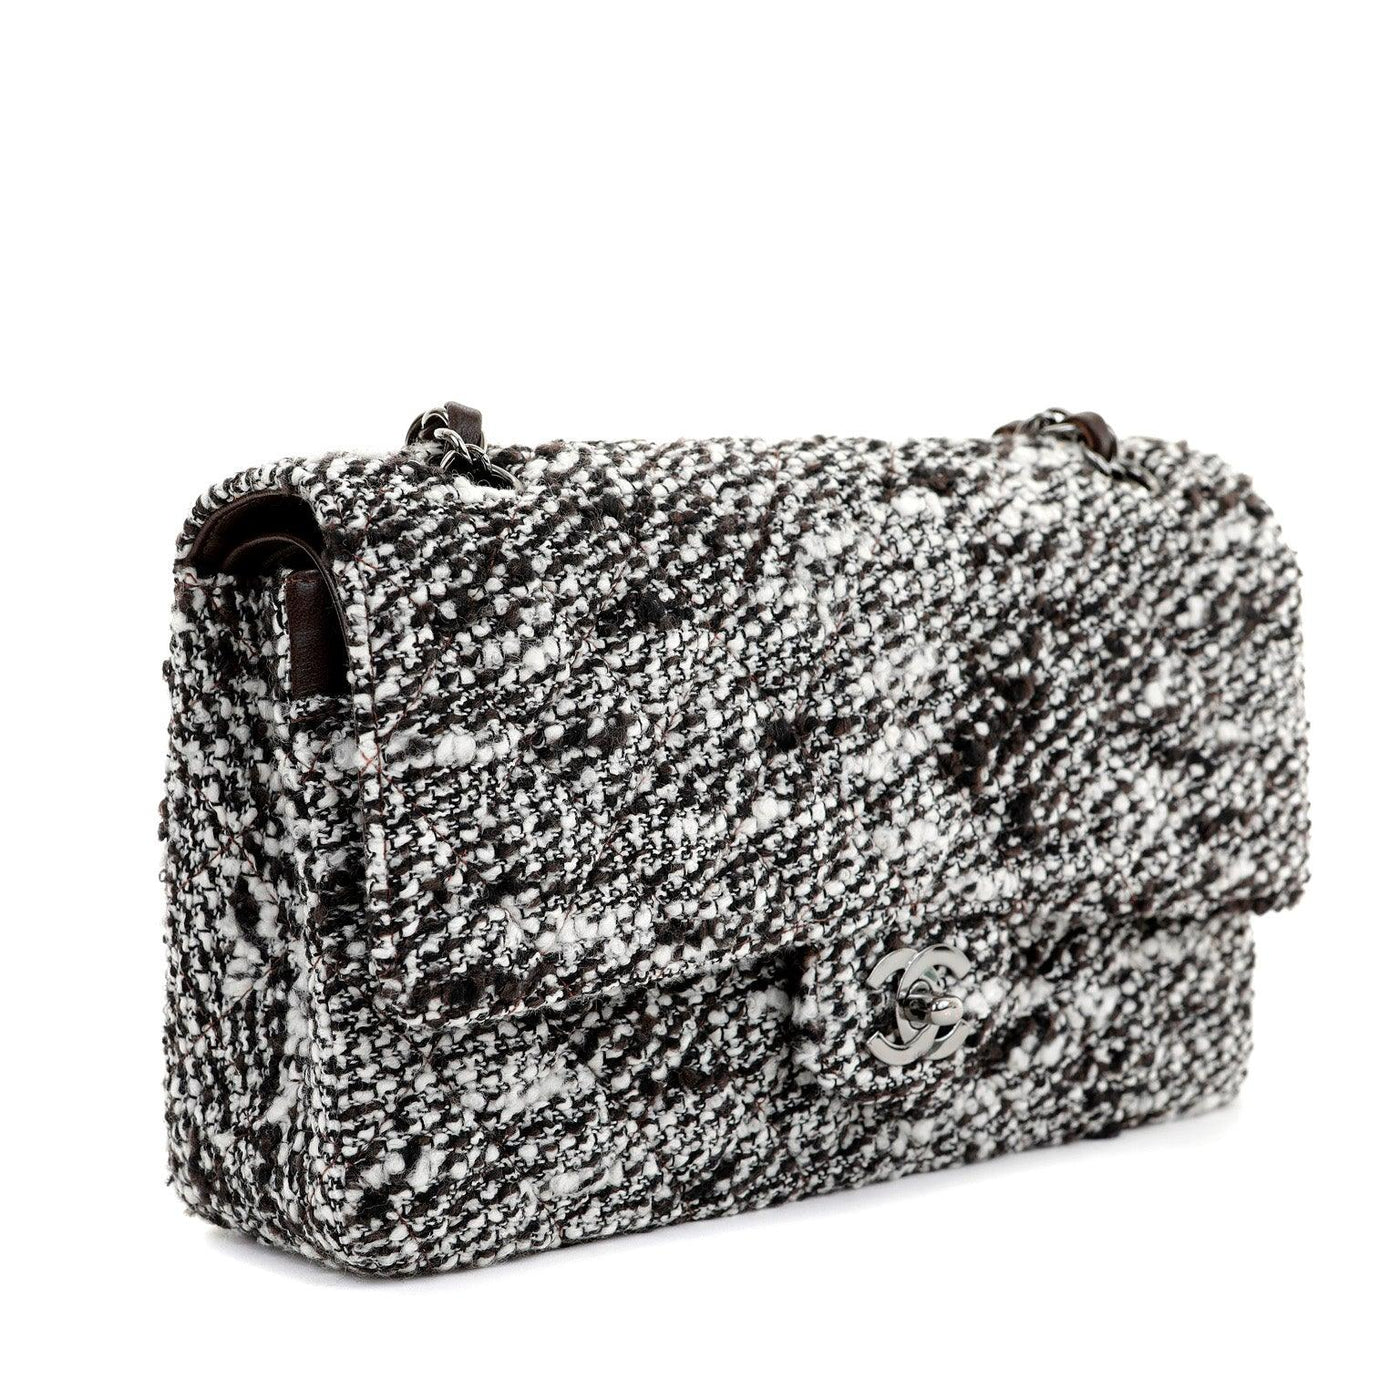 Chanel Coffee Tweed Runway Medium Classic with Silver Hardware - Only Authentics